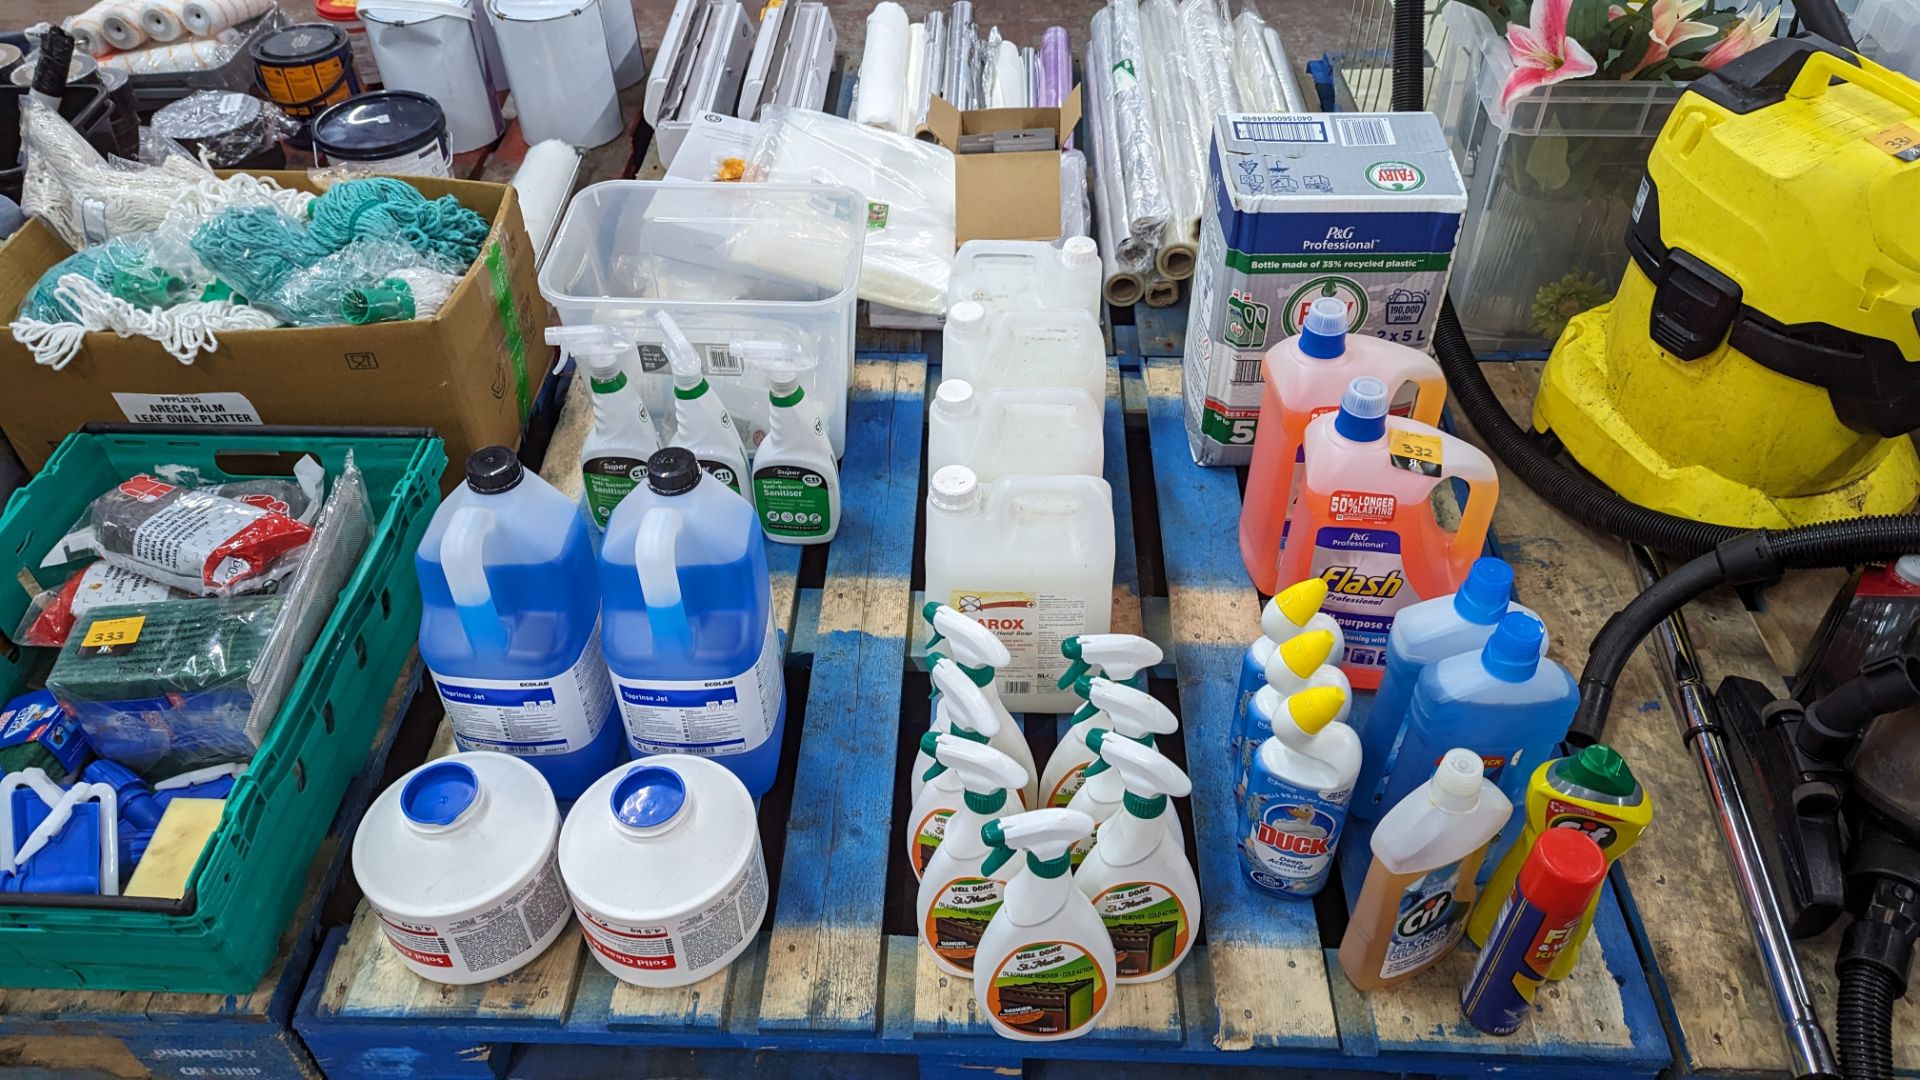 The contents of a pallet of cleaning fluids/solutions